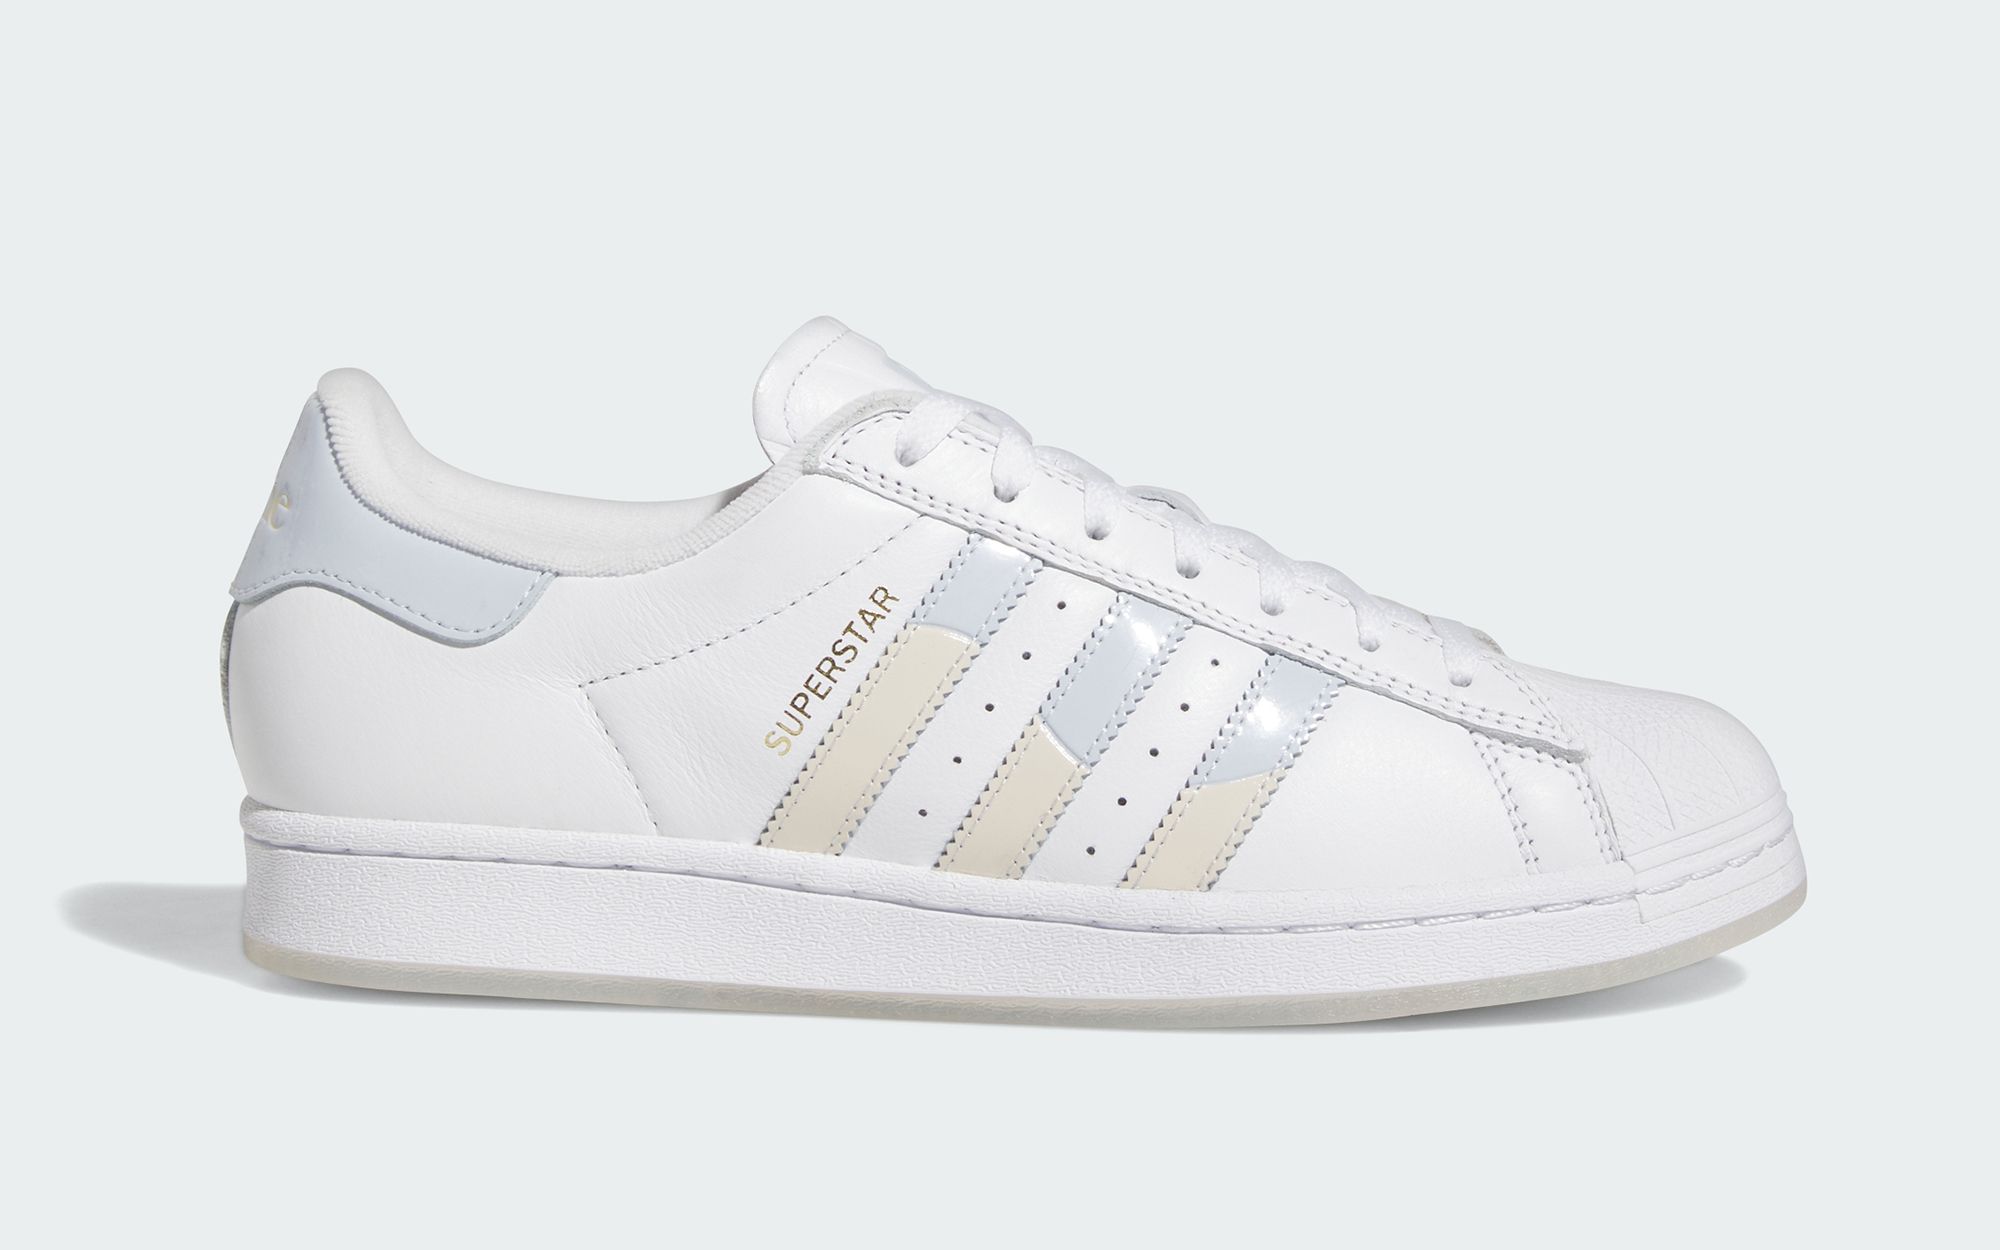 The Dime x adidas Superstar ADV Collection Arrives May 15th